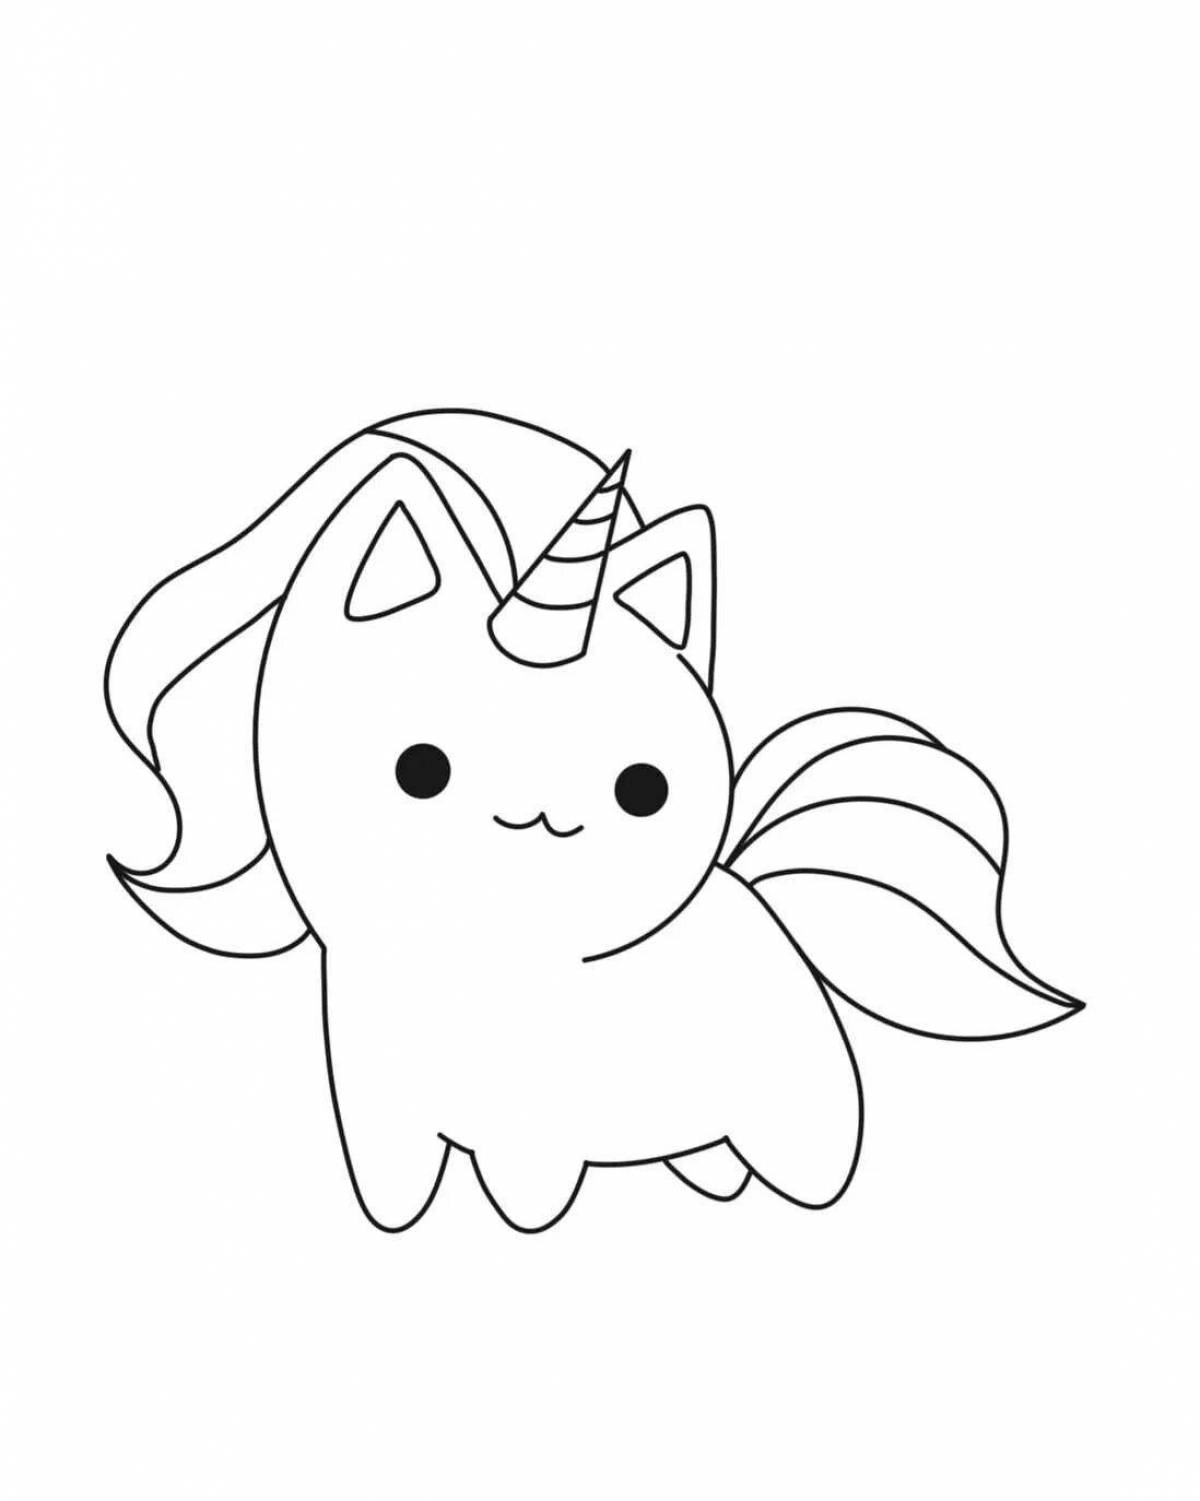 Wonderful unicorn cat coloring pages for girls